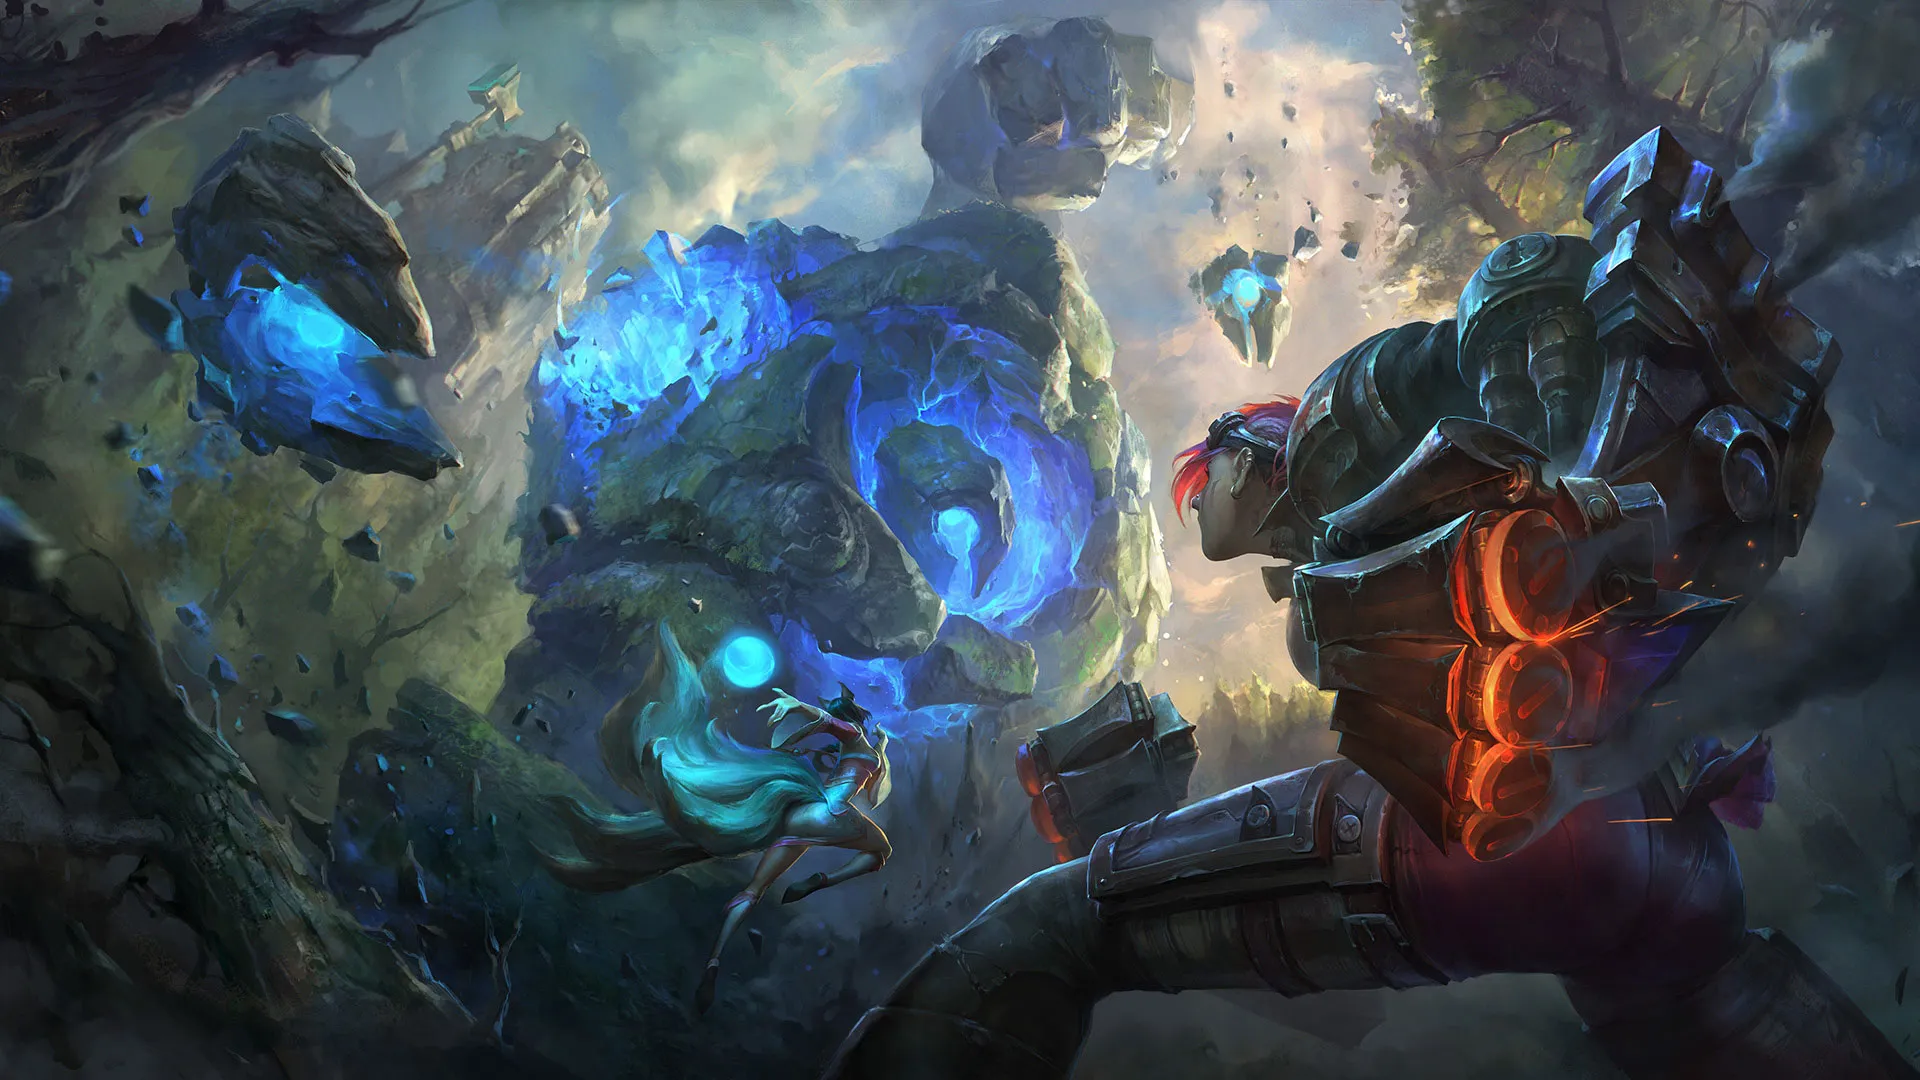 Season 2022 is in bloom! Catch up on the latest champion balances, Ahri's refresh, fighter item changes, and more.